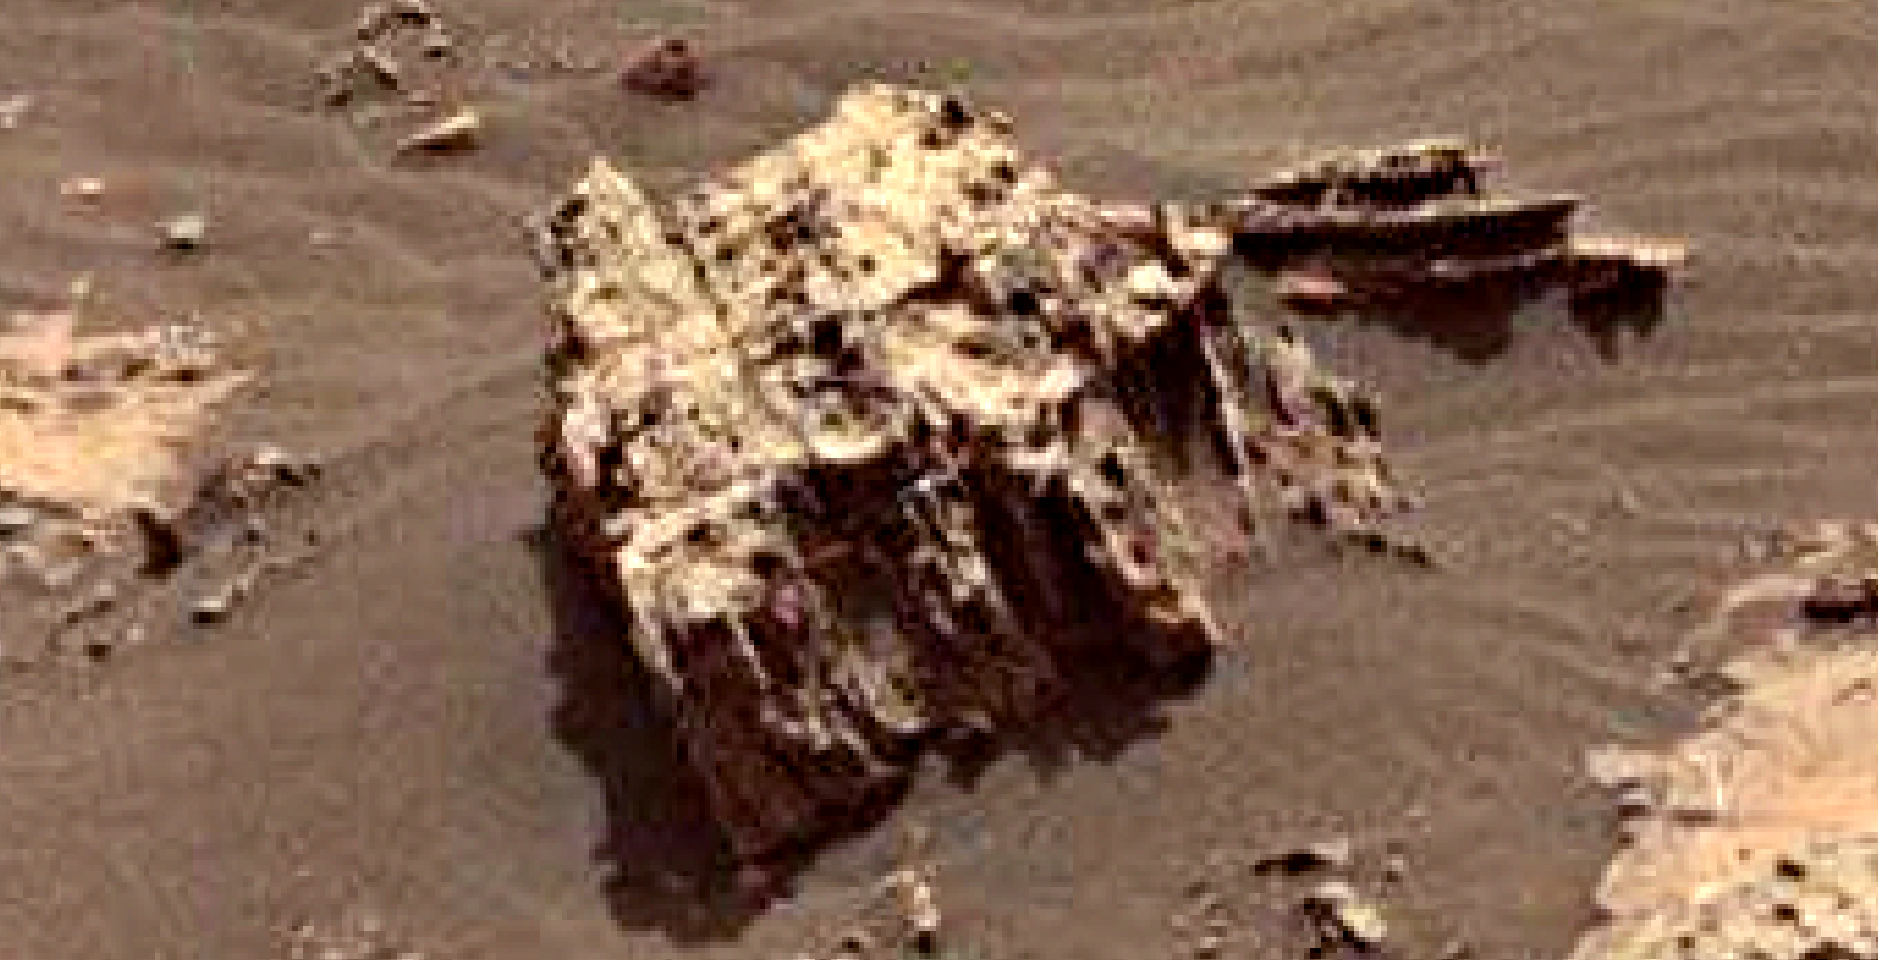 mars-sol-1485-anomaly-artifacts-7-was-life-on-mars